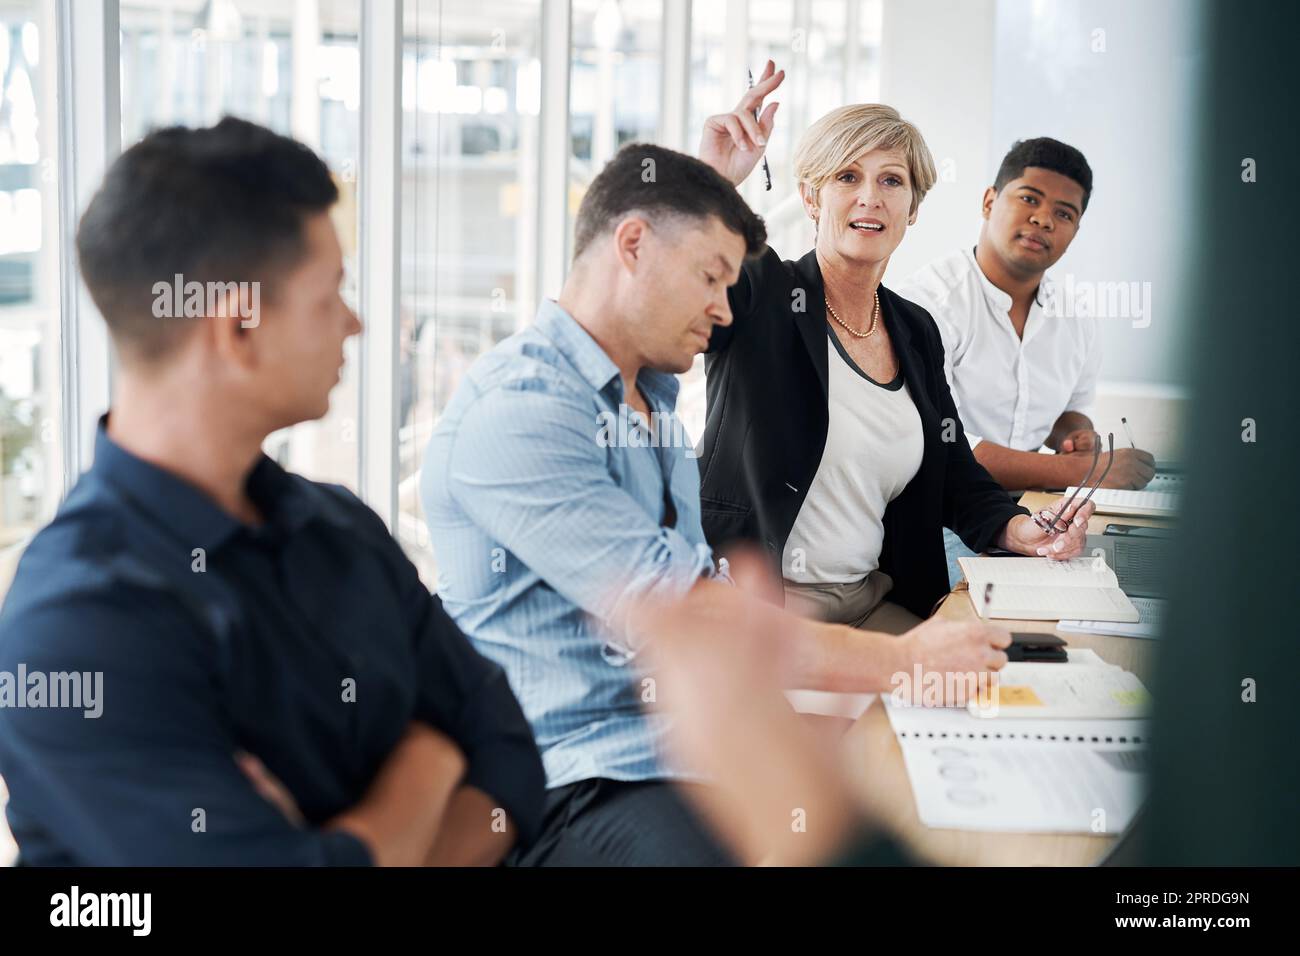 A question sparking business conference. a mature businesswoman raising her hand to ask questions during a meeting. Stock Photo